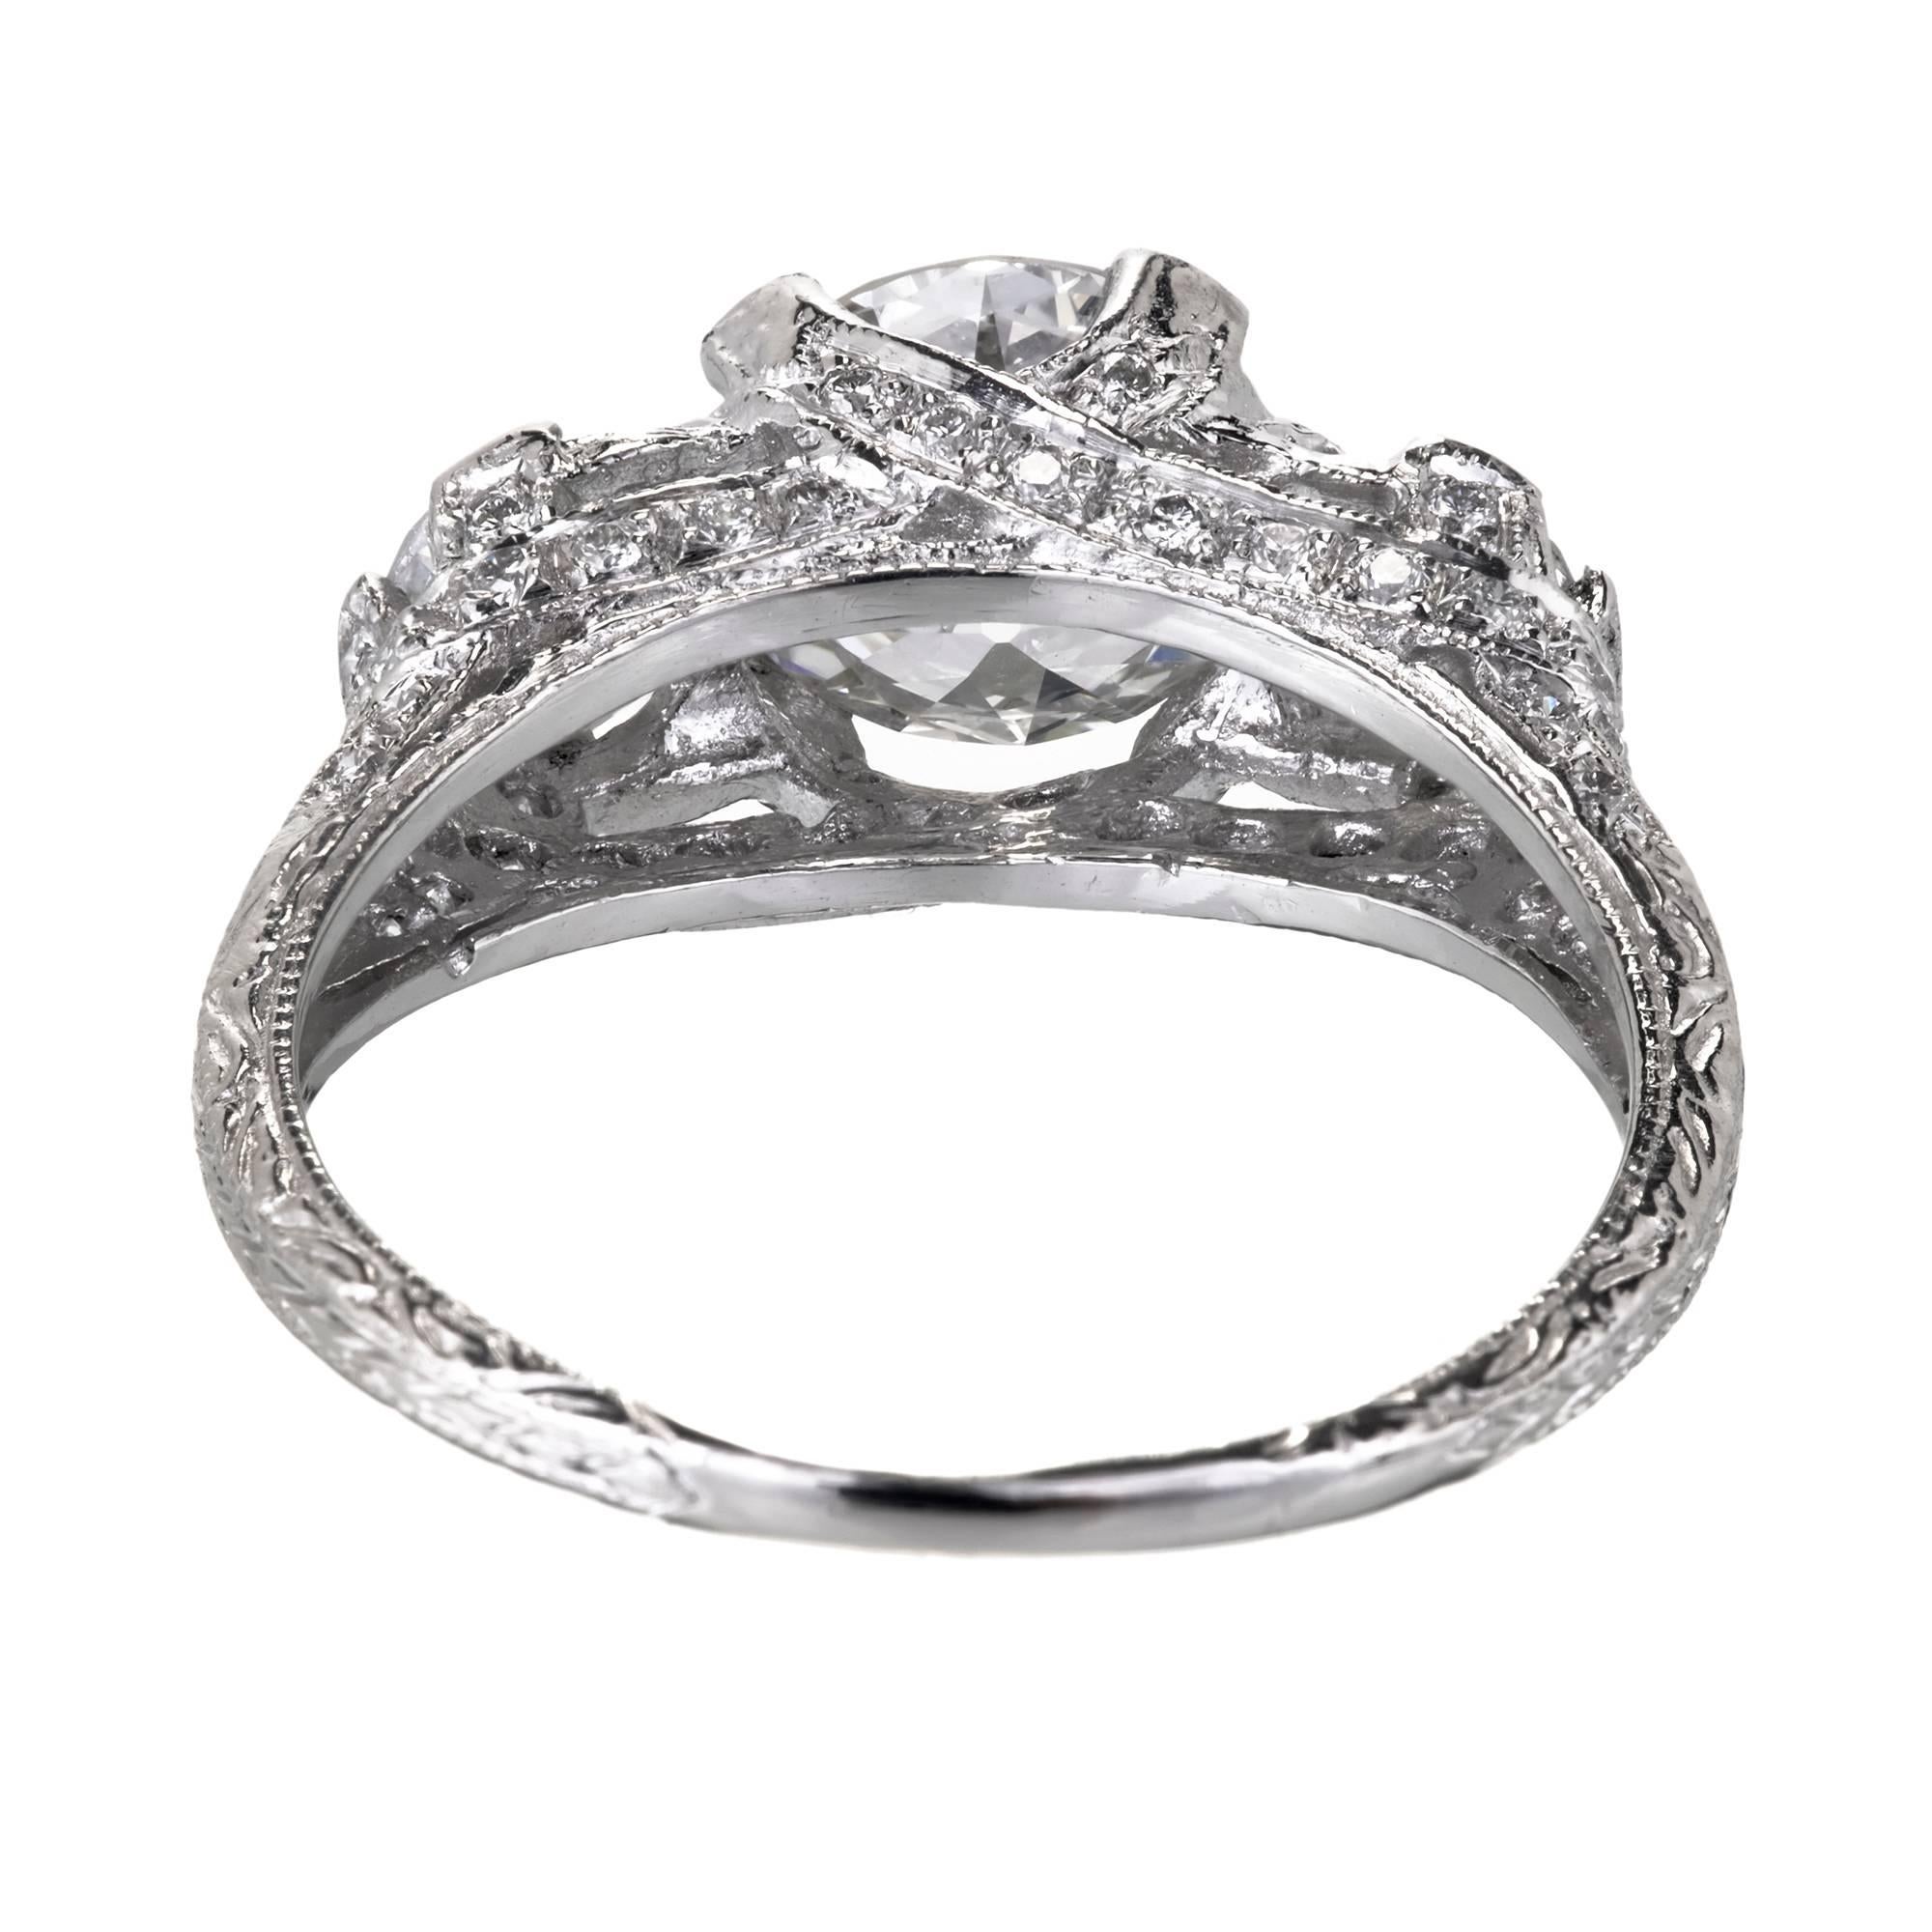 Peter Suchy Designs custom made diamond three-stone platinum engagement ring with vintage old European cut Diamonds in one of our most graceful engagement ring settings. Crafted using old world engraving.

1 old European round brilliant cut Diamond,